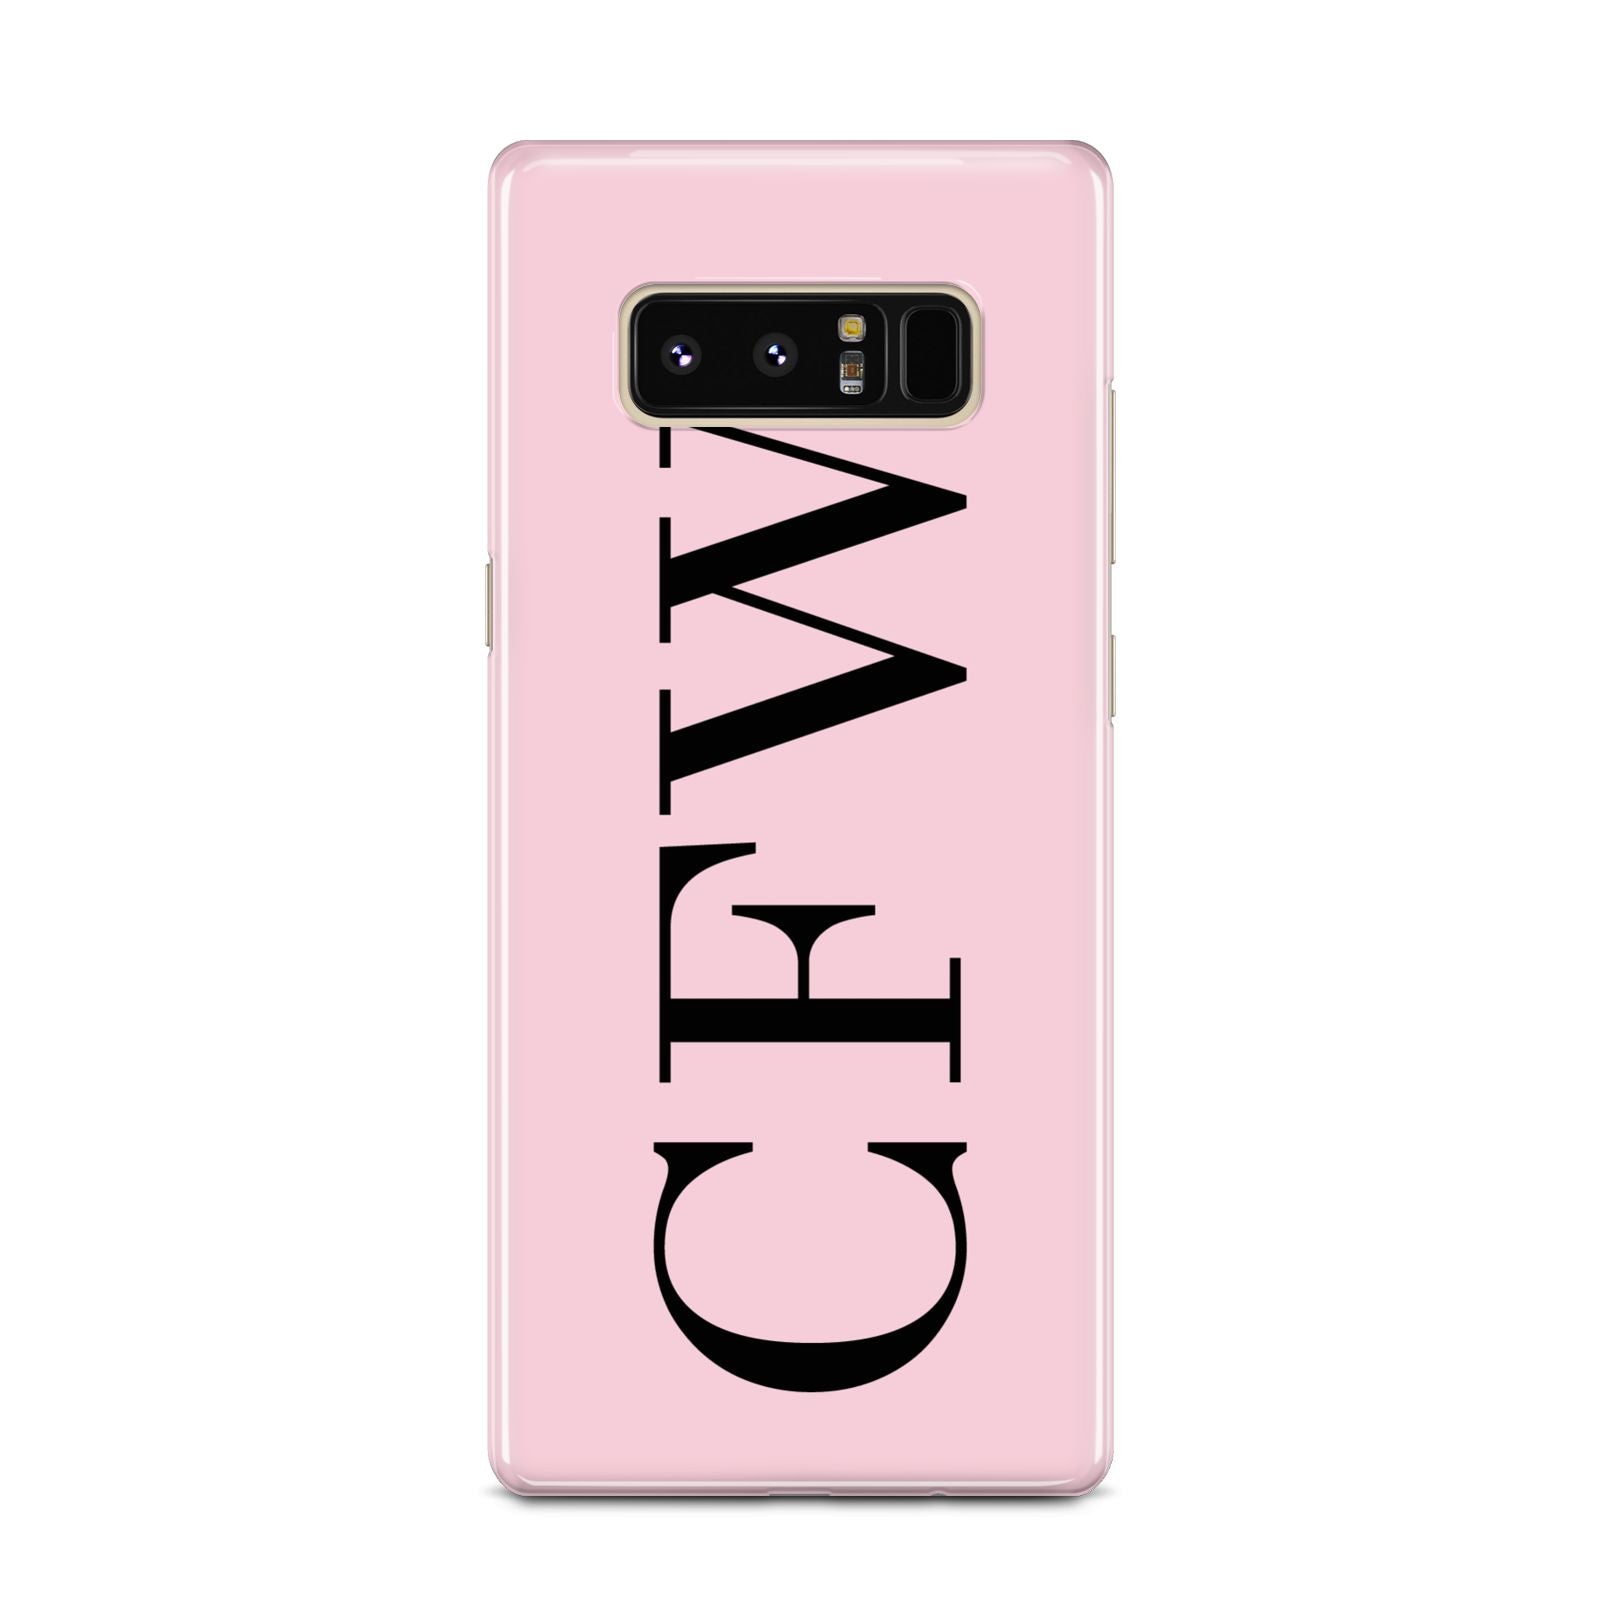 Personalised Black Pink Side Initials Samsung Galaxy Note 8 Case